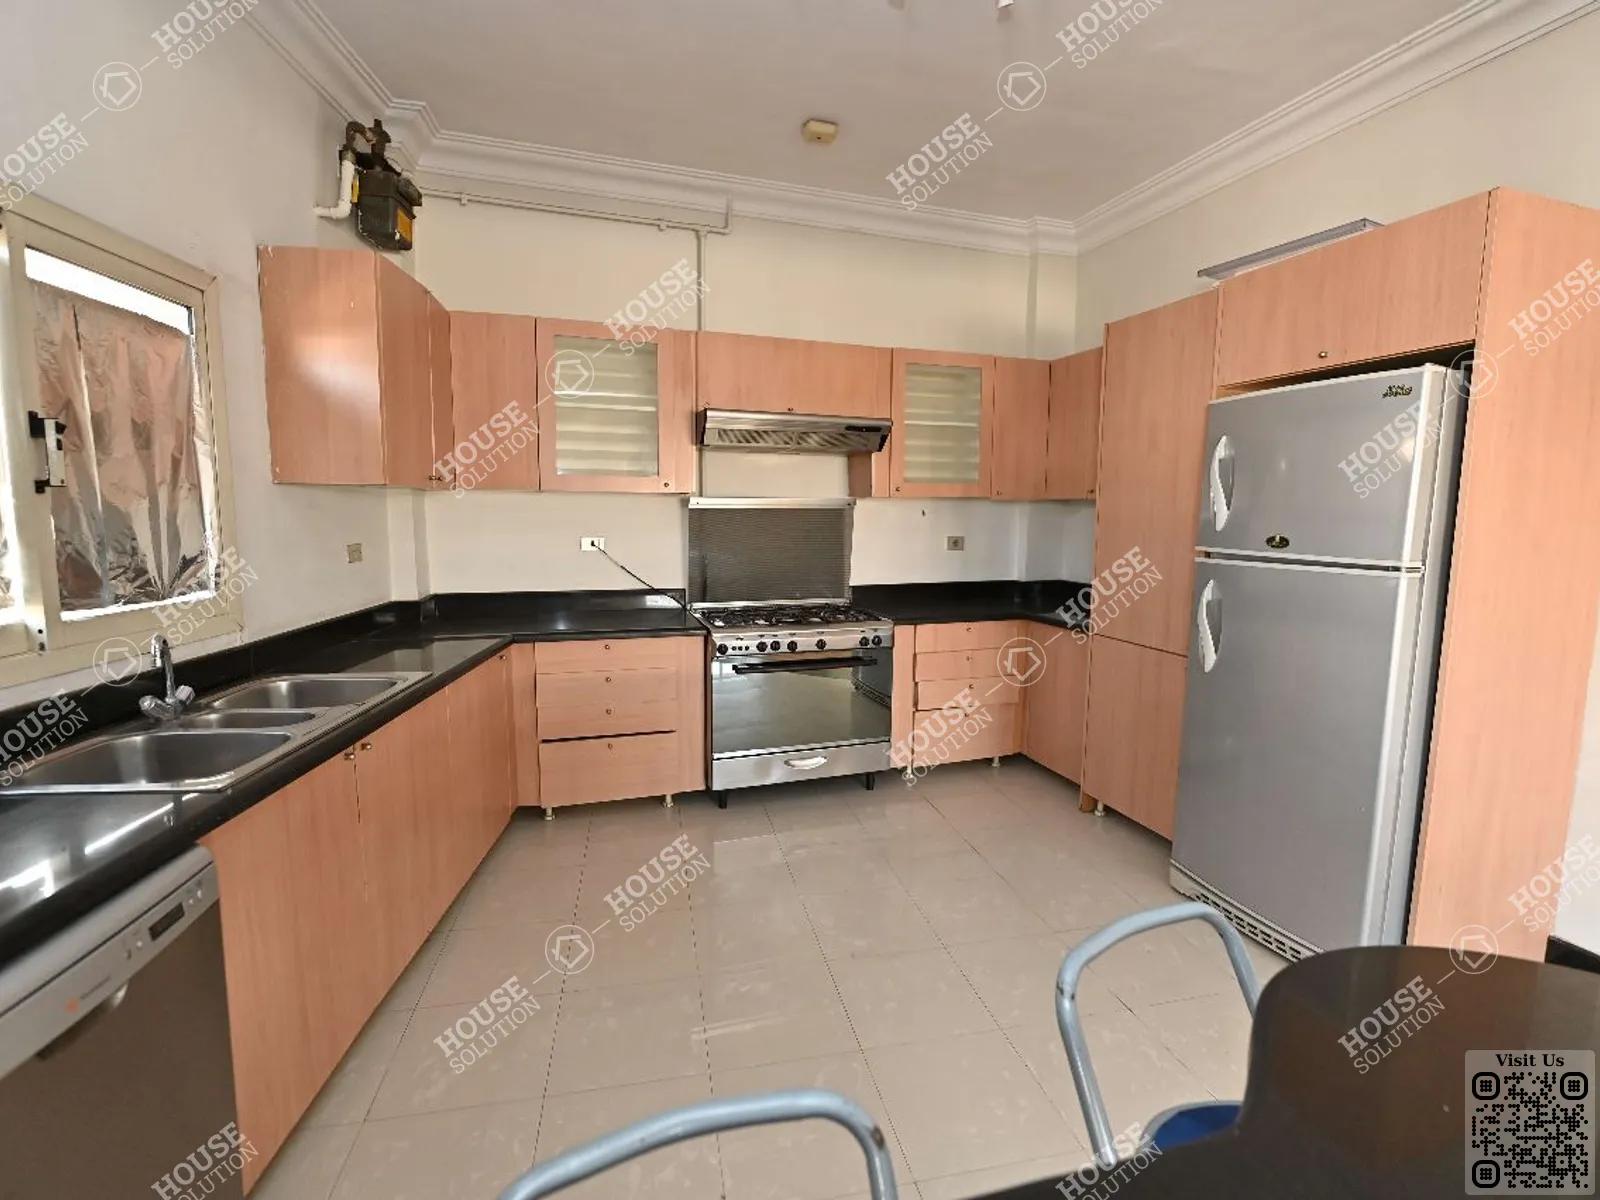 KITCHEN  @ Apartments For Rent In Maadi Maadi Degla Area: 120 m² consists of 3 Bedrooms 2 Bathrooms Modern furnished 5 stars #5619-2